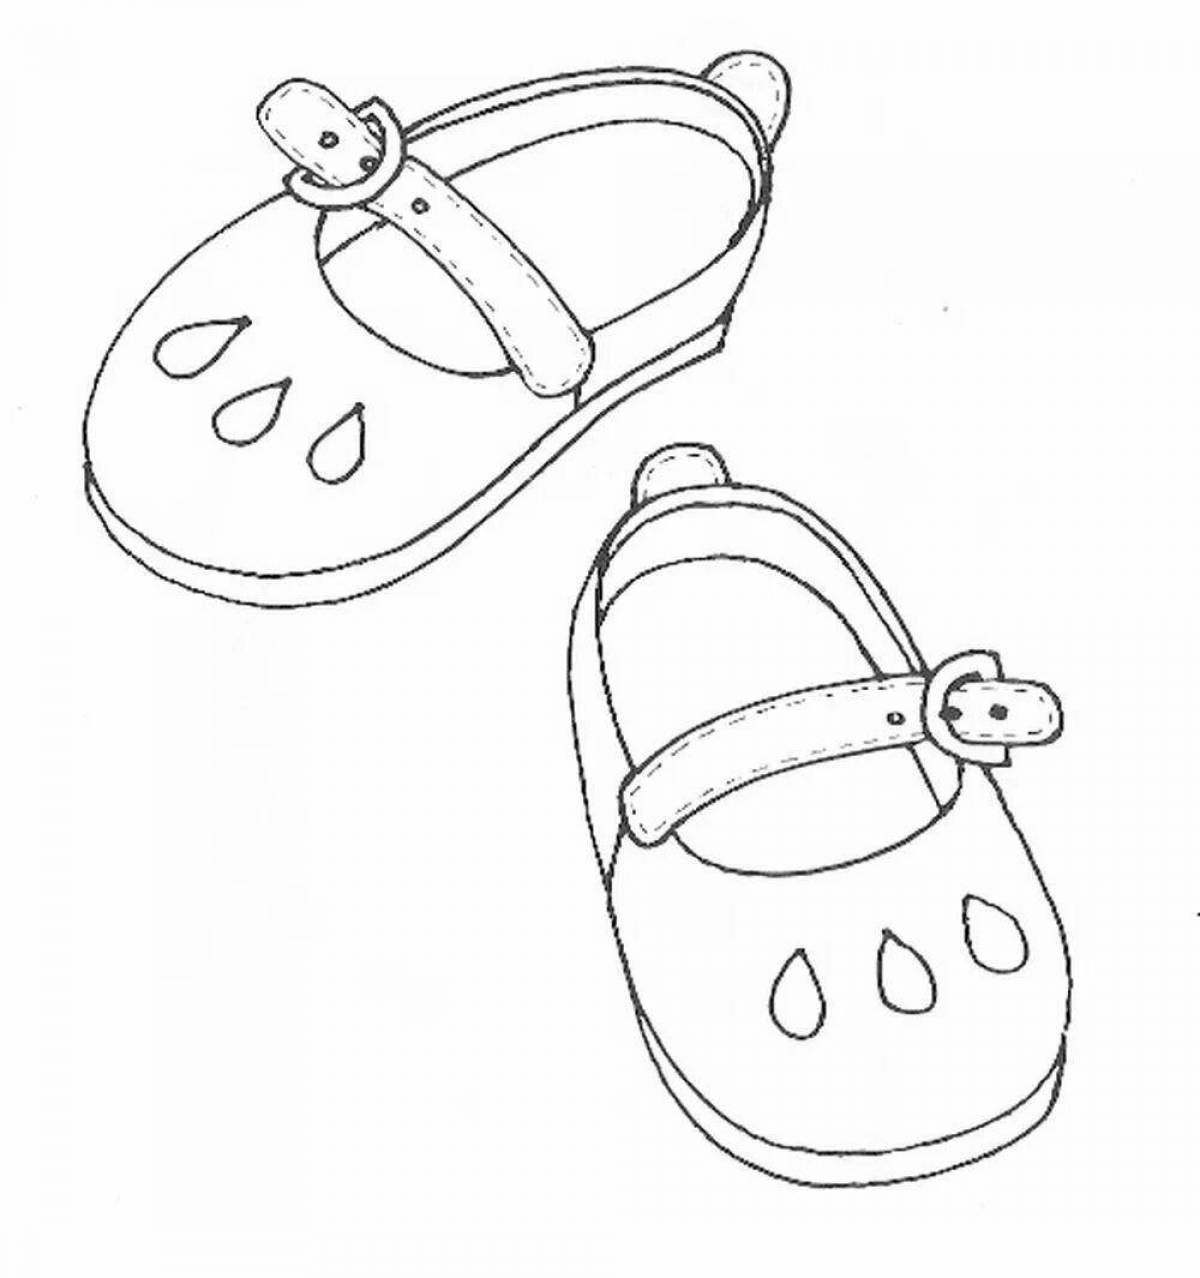 Adorable sandals coloring page